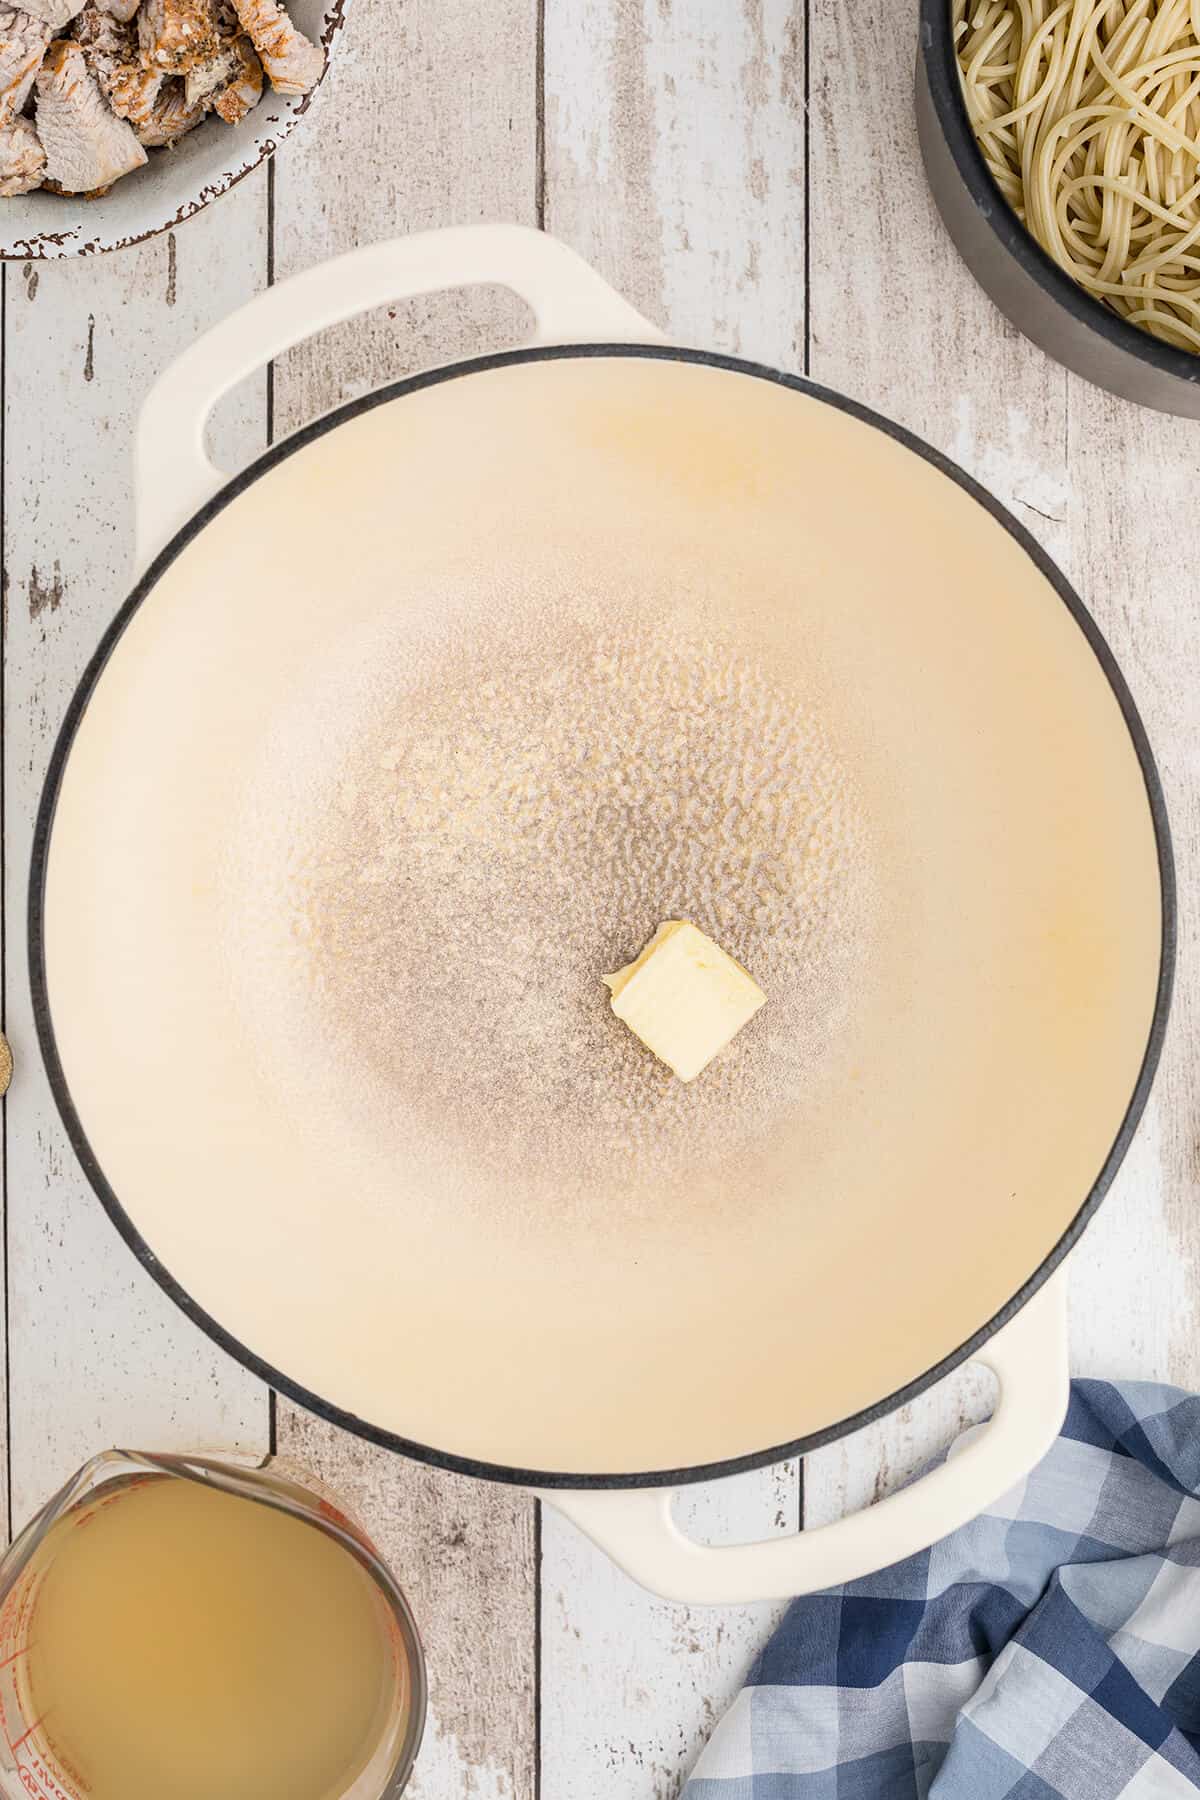 Butter melting in a large saucepan.